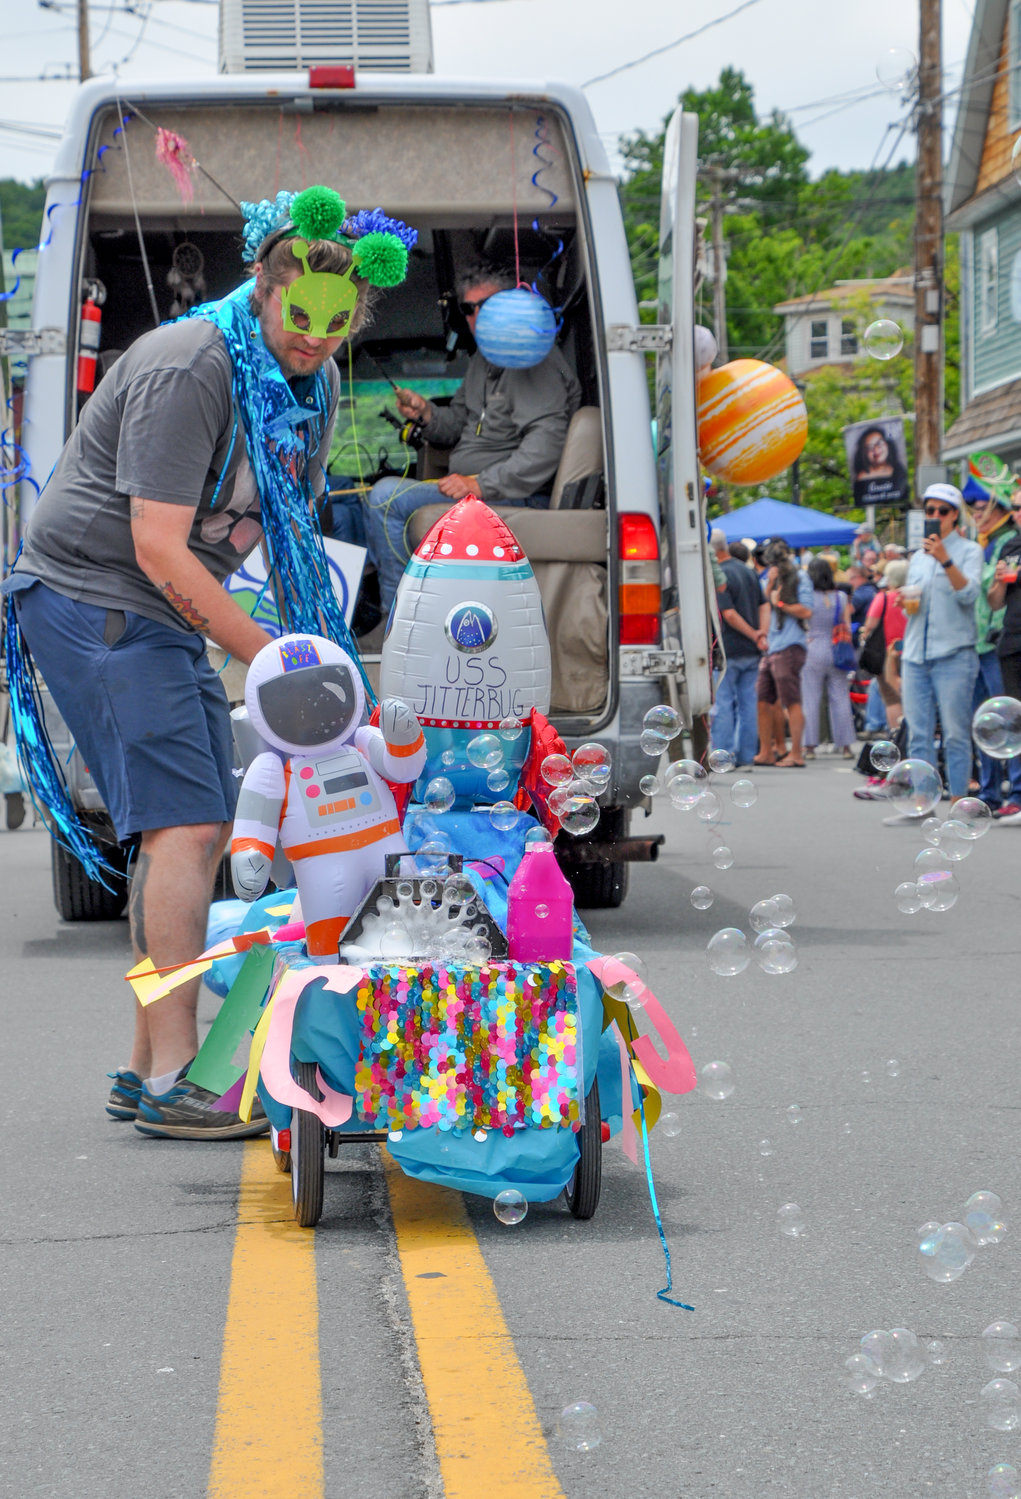 The theme changes yearly, which makes for even more fishy fun. I was excited to see everyone’s interpretation of “Trouter Space” at the 2022 Livingston Manor Trout Parade last Saturday. Can you say "bubbles?"